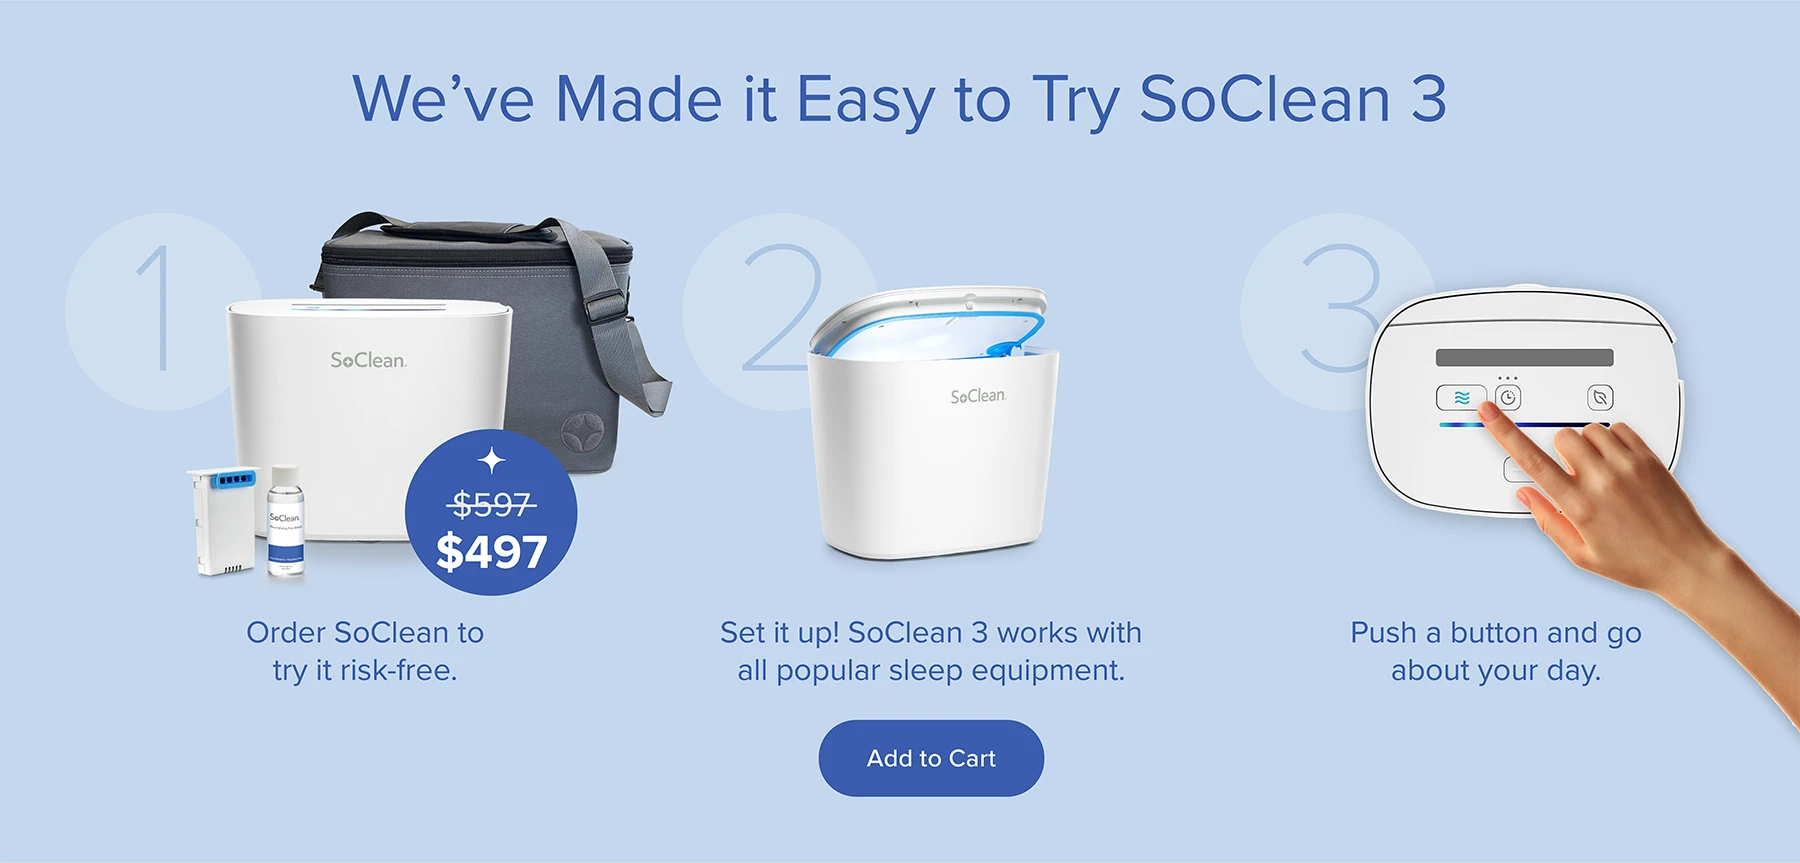 We've Made it Easy to try SoClean 3